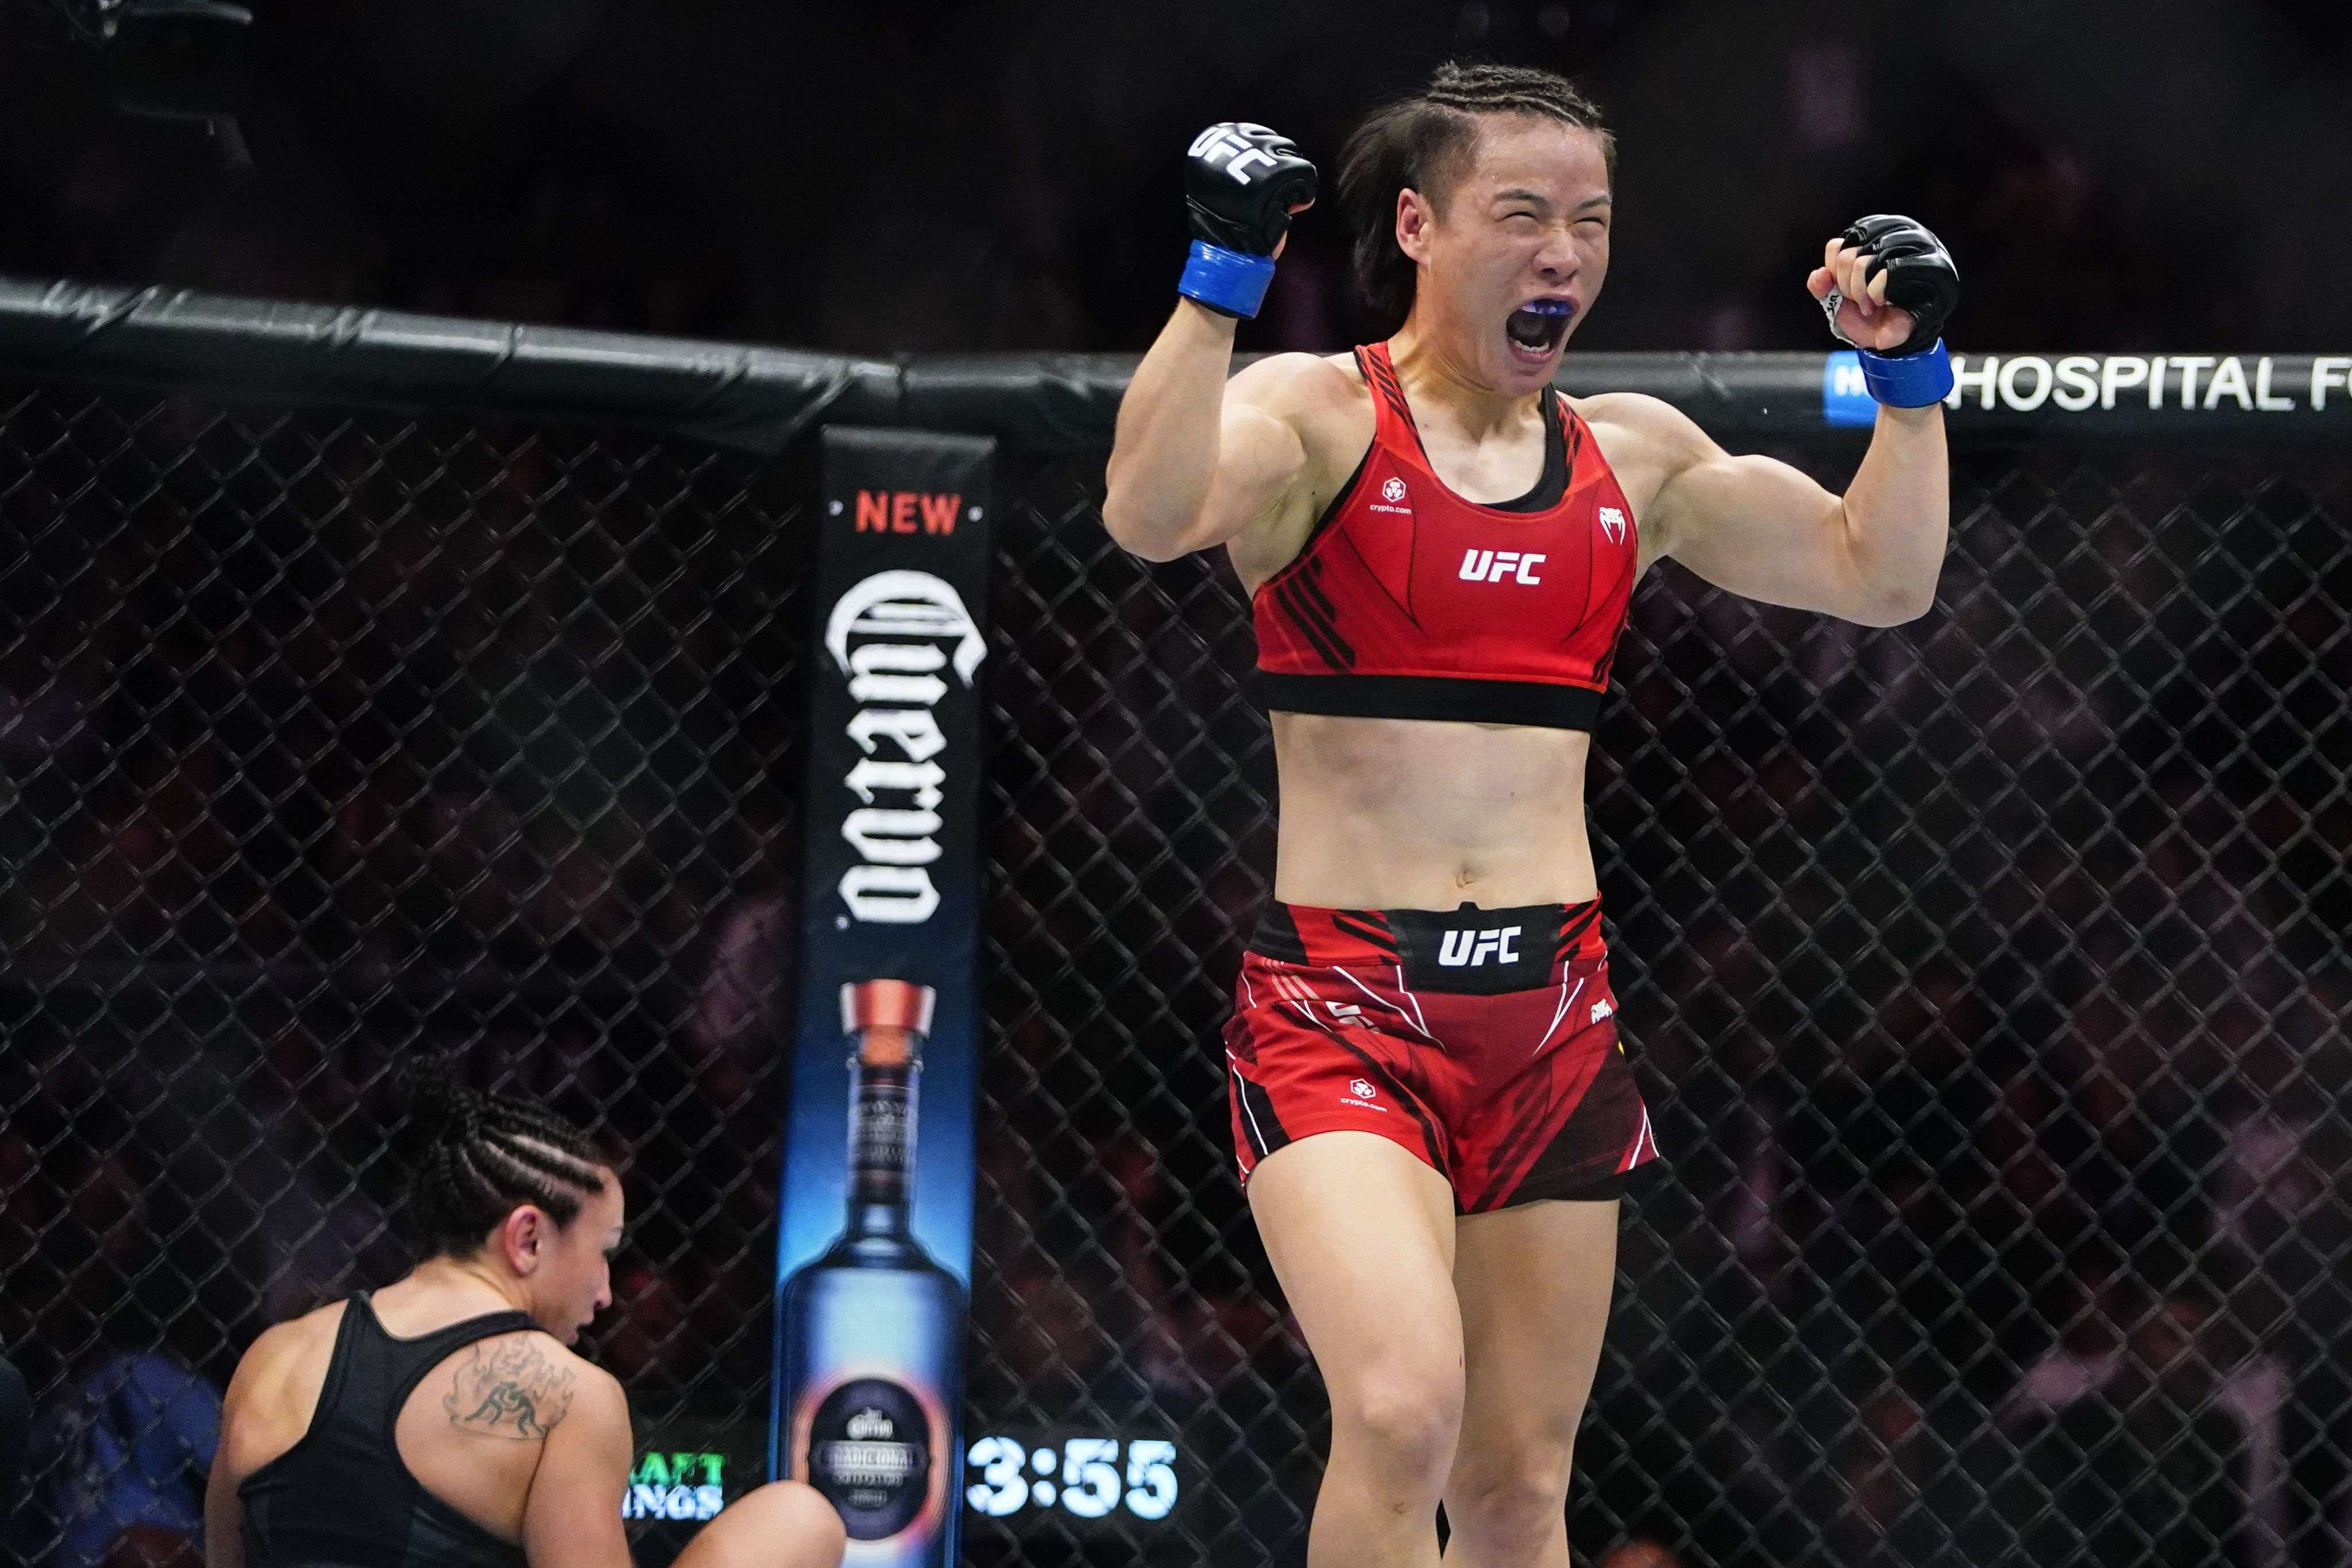 China’s Zhang Weili celebrates after defeating Carla Esparza in a women’s strawweight title bout at UFC 281 in New York. Photo: AP